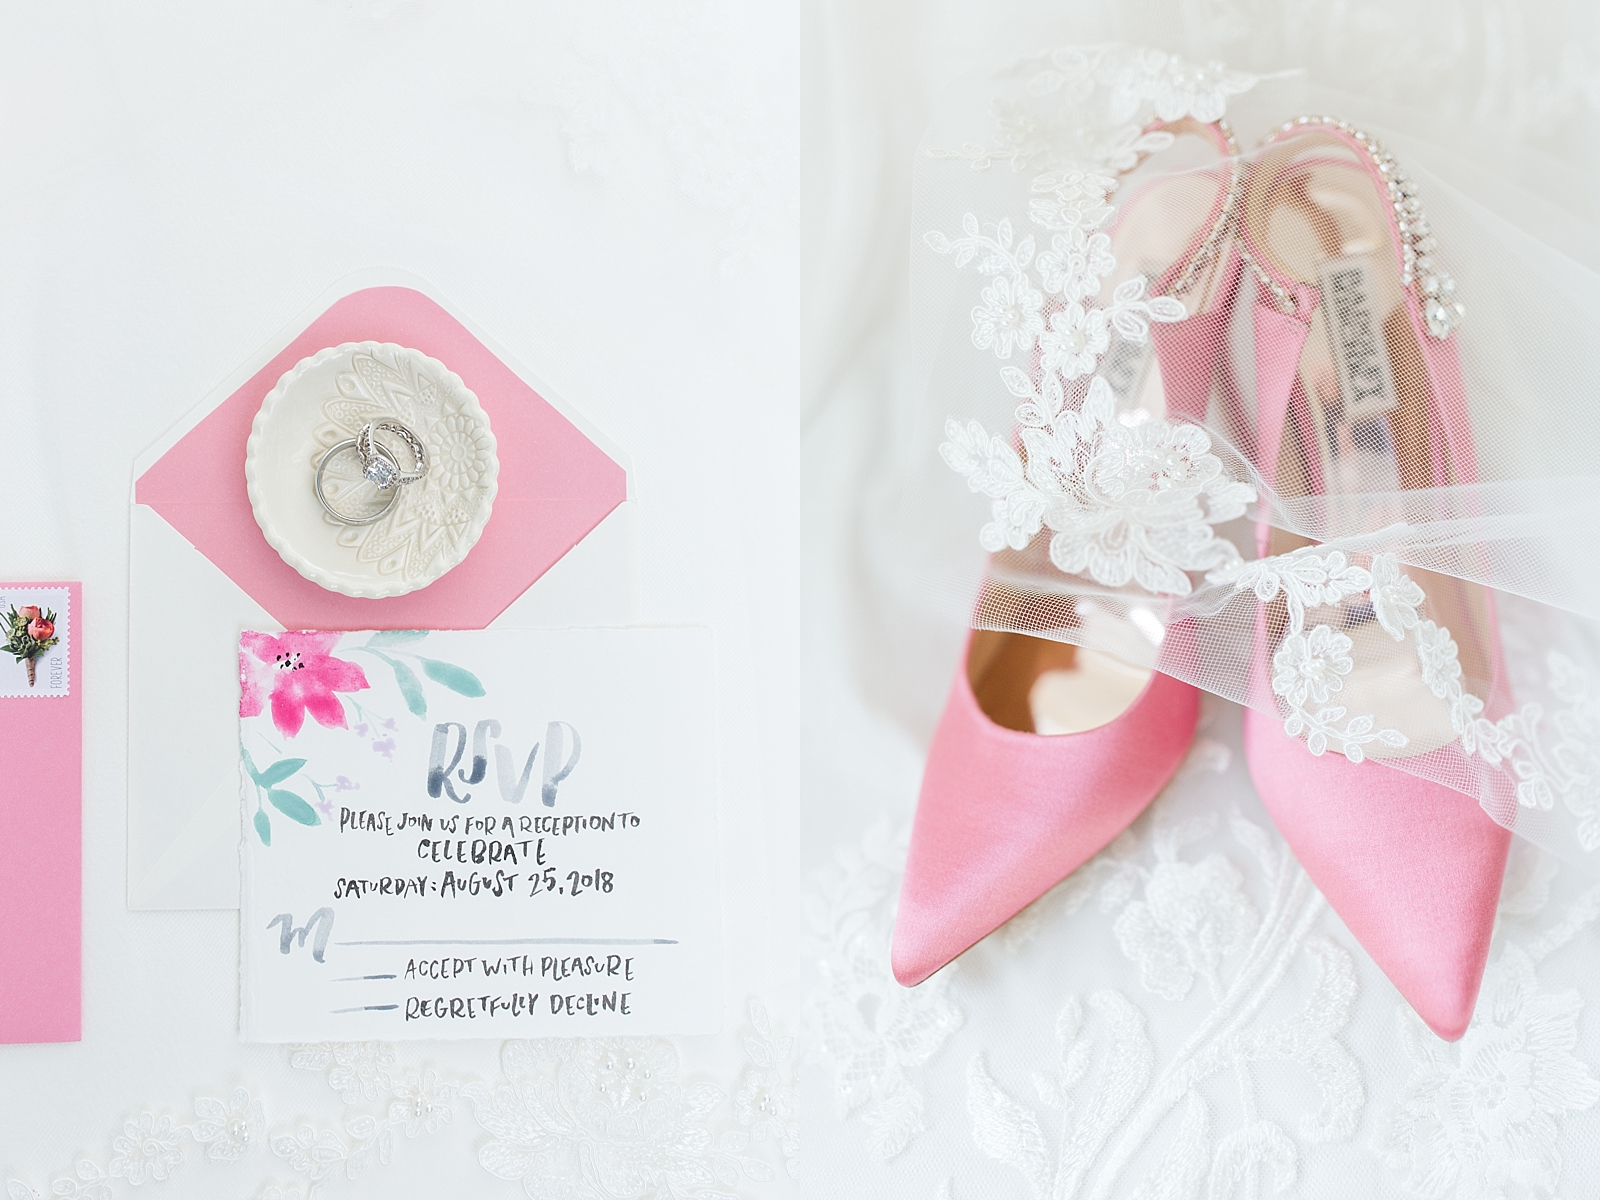 Beaufort South Carolina Wedding rings and invitation and bridal shoes with veil Photos